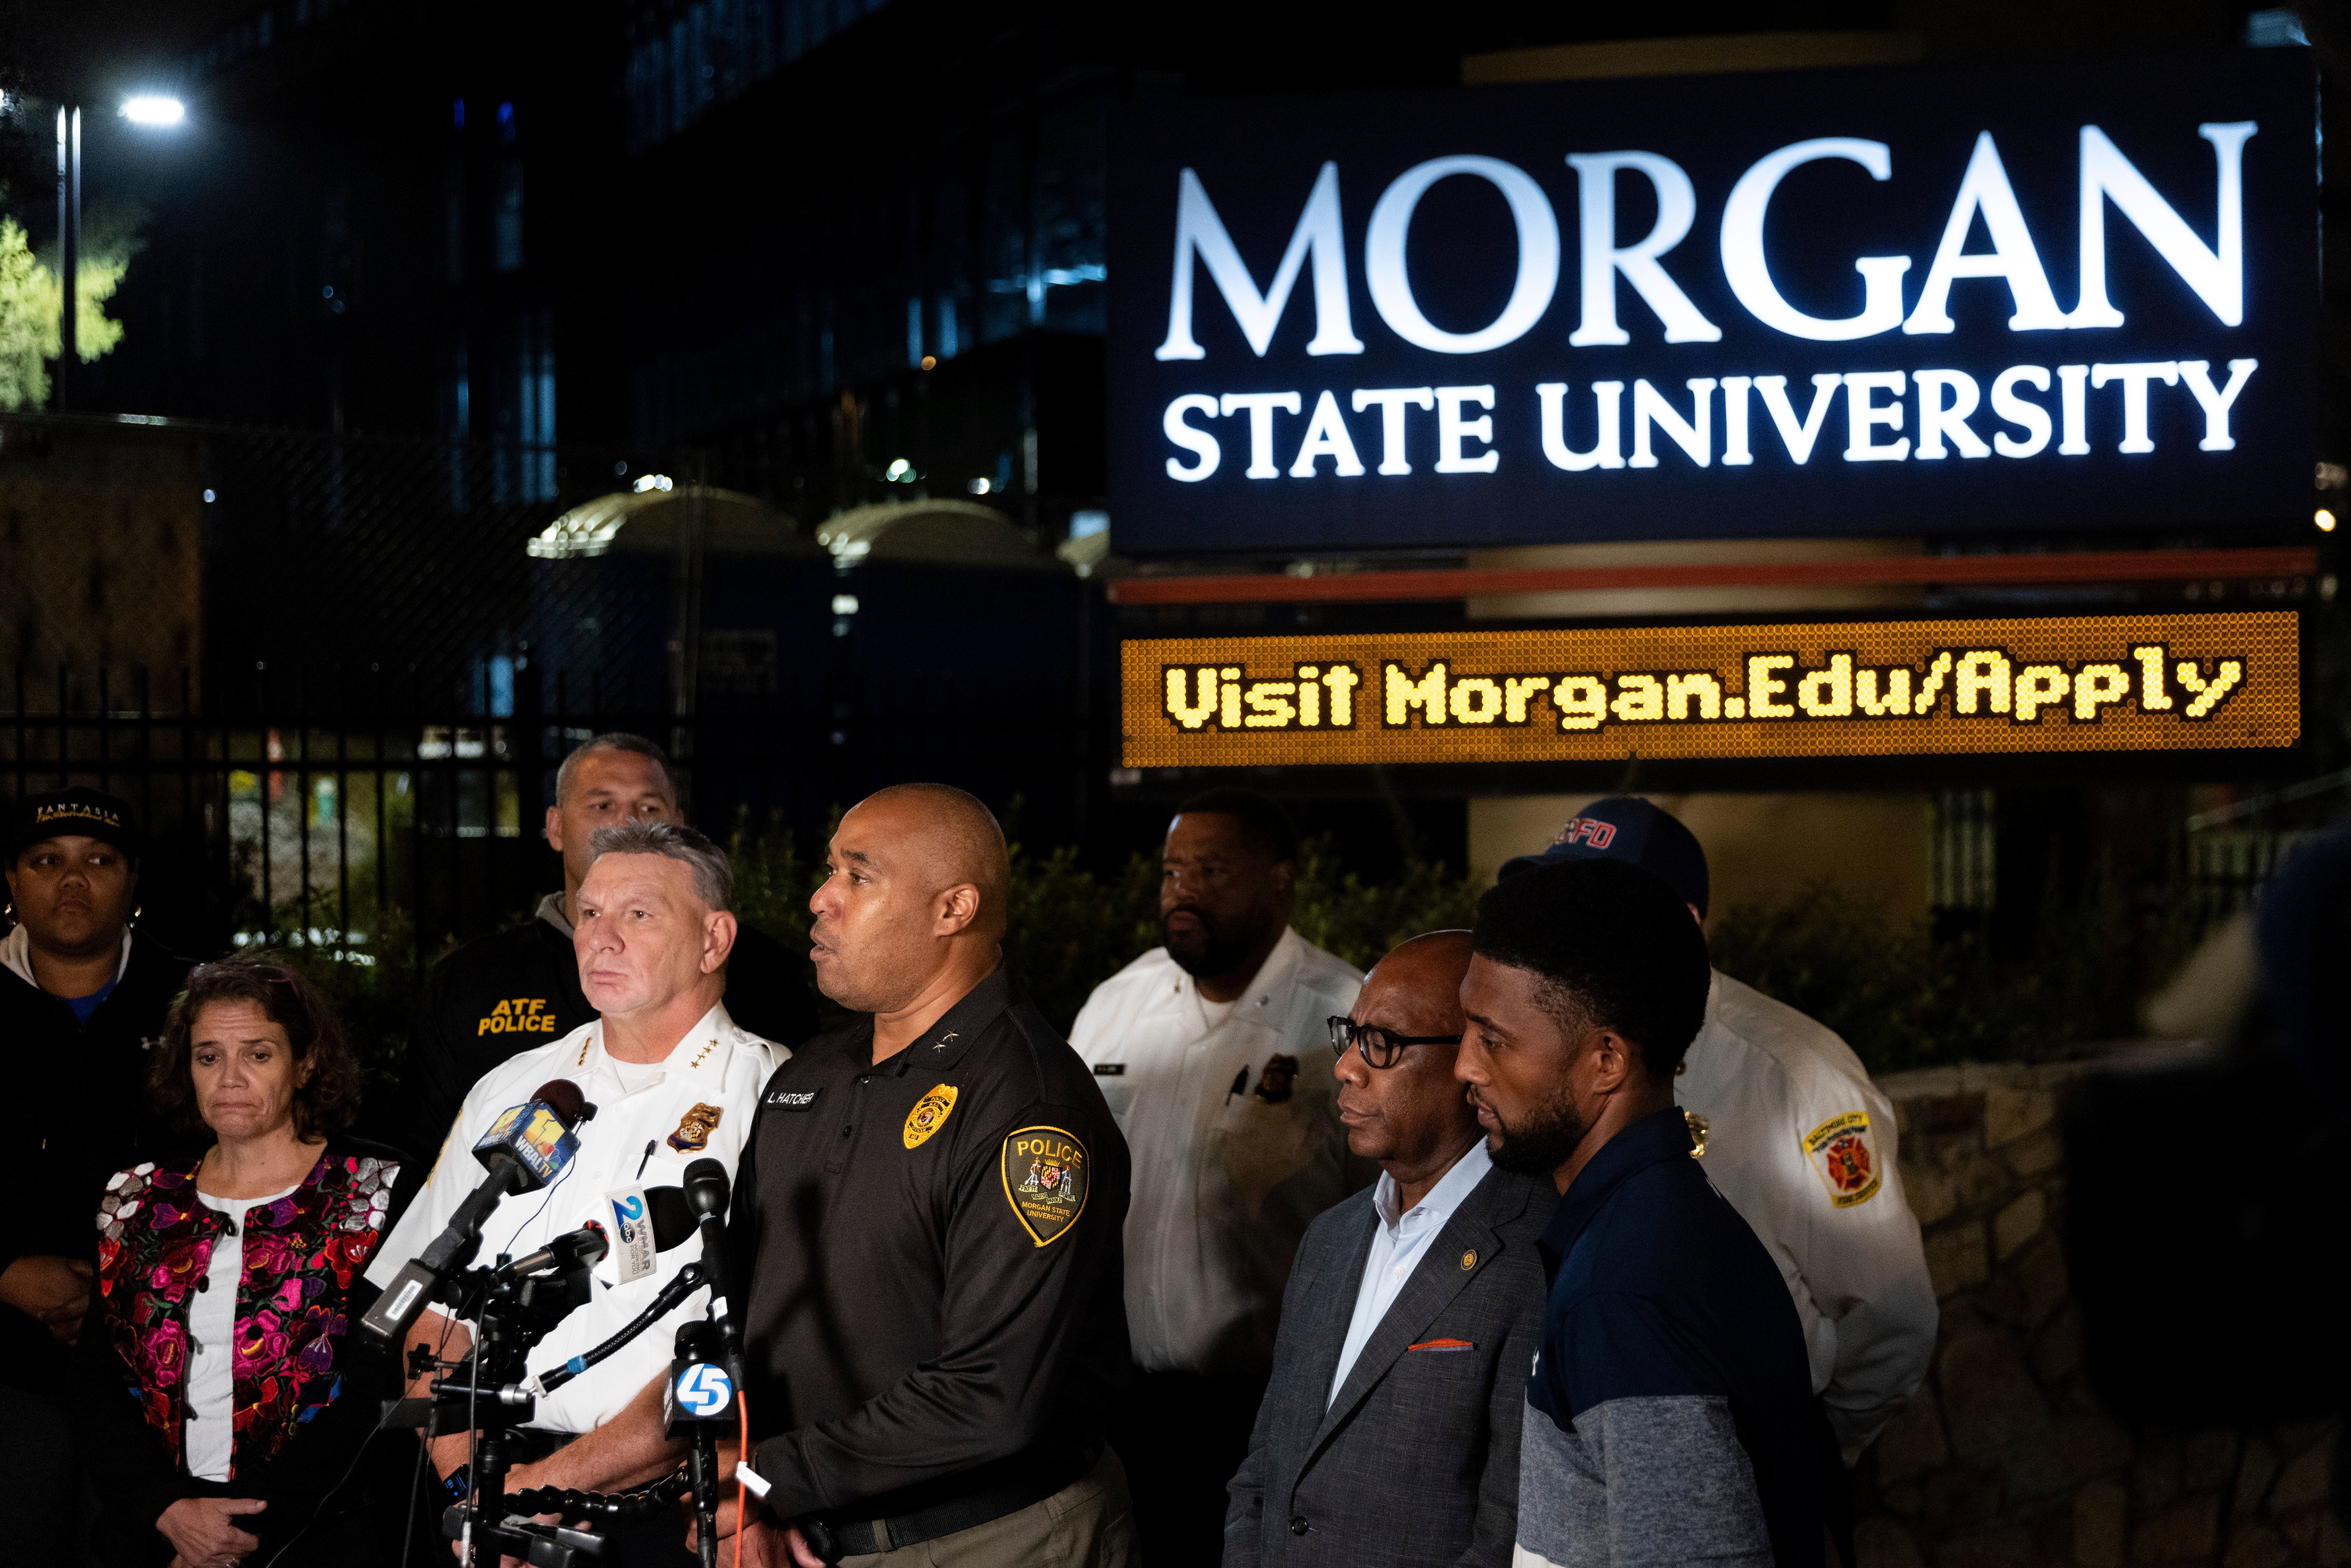 Police give briefing about Morgan State University shooting